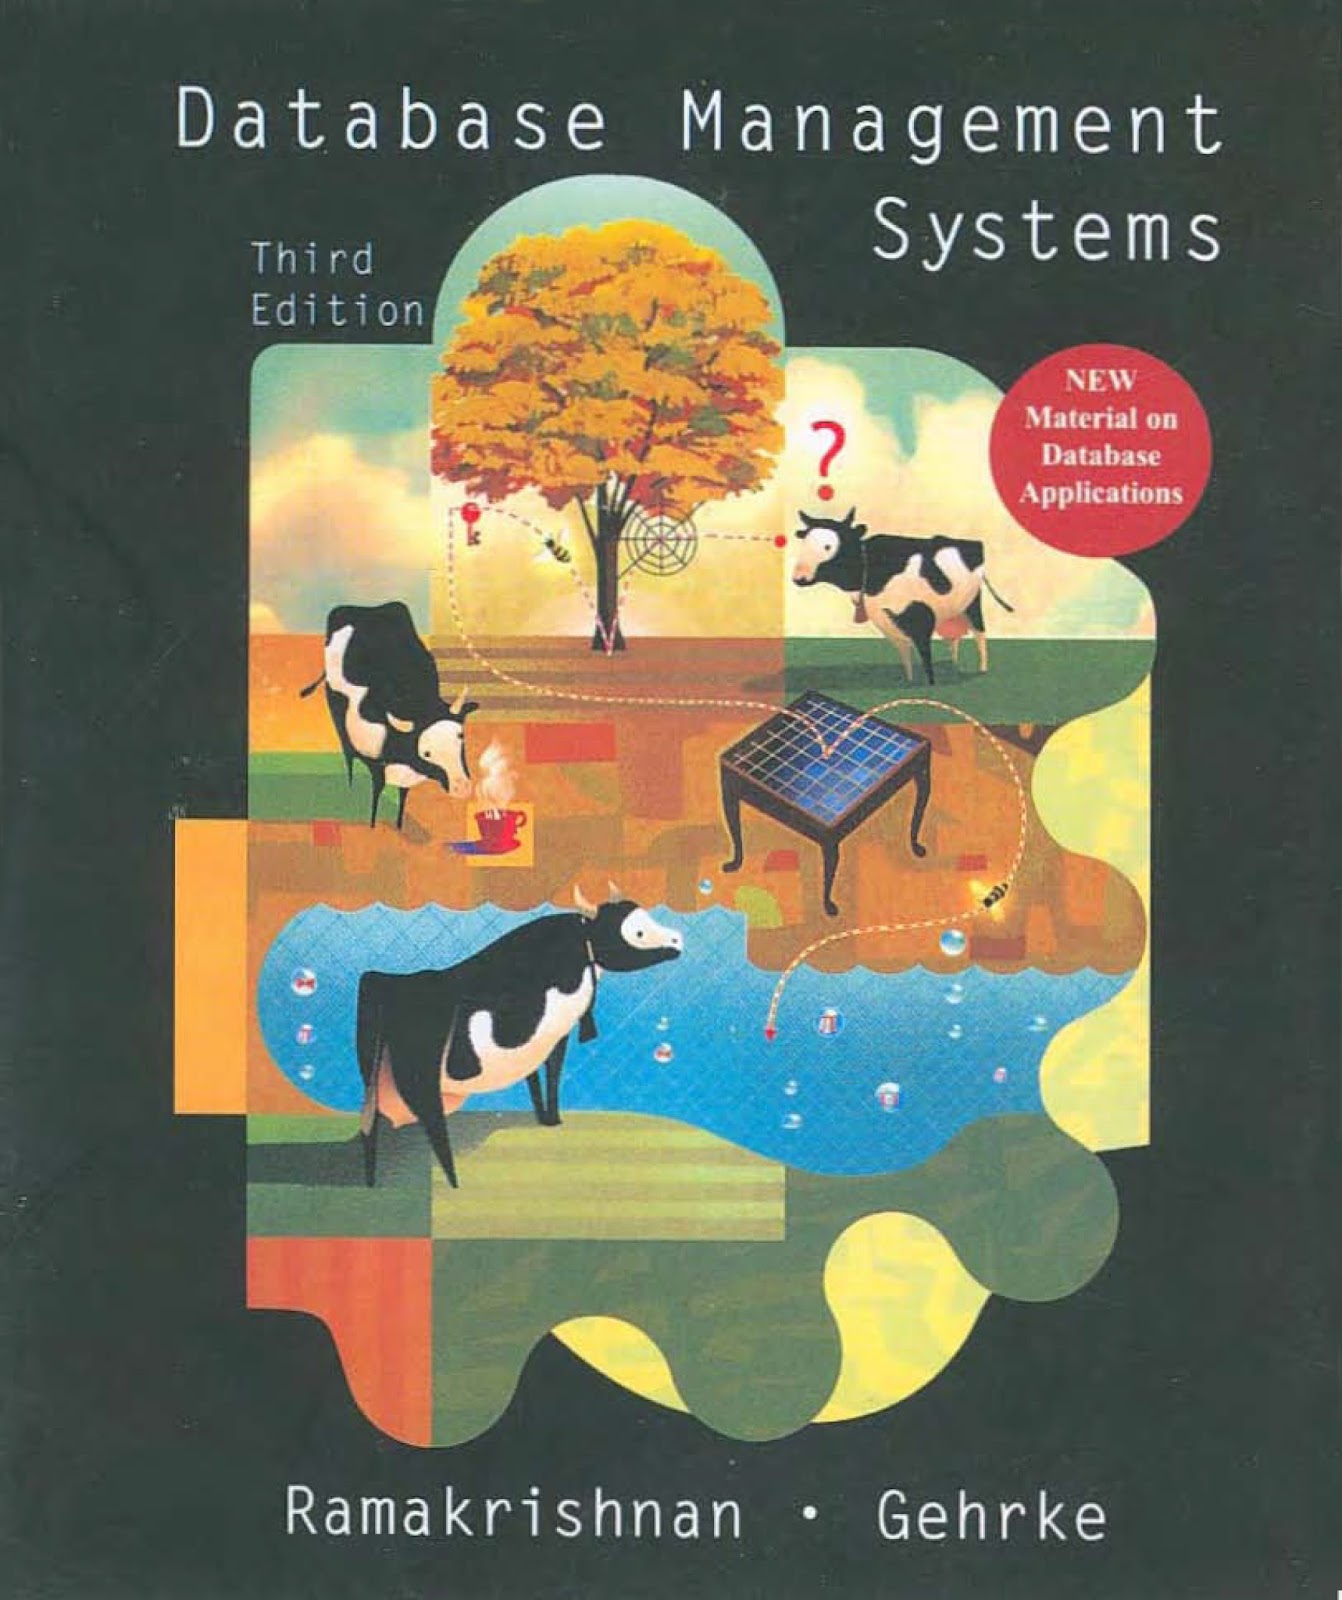 fundamentals of database systems 6th edition solution manual free download